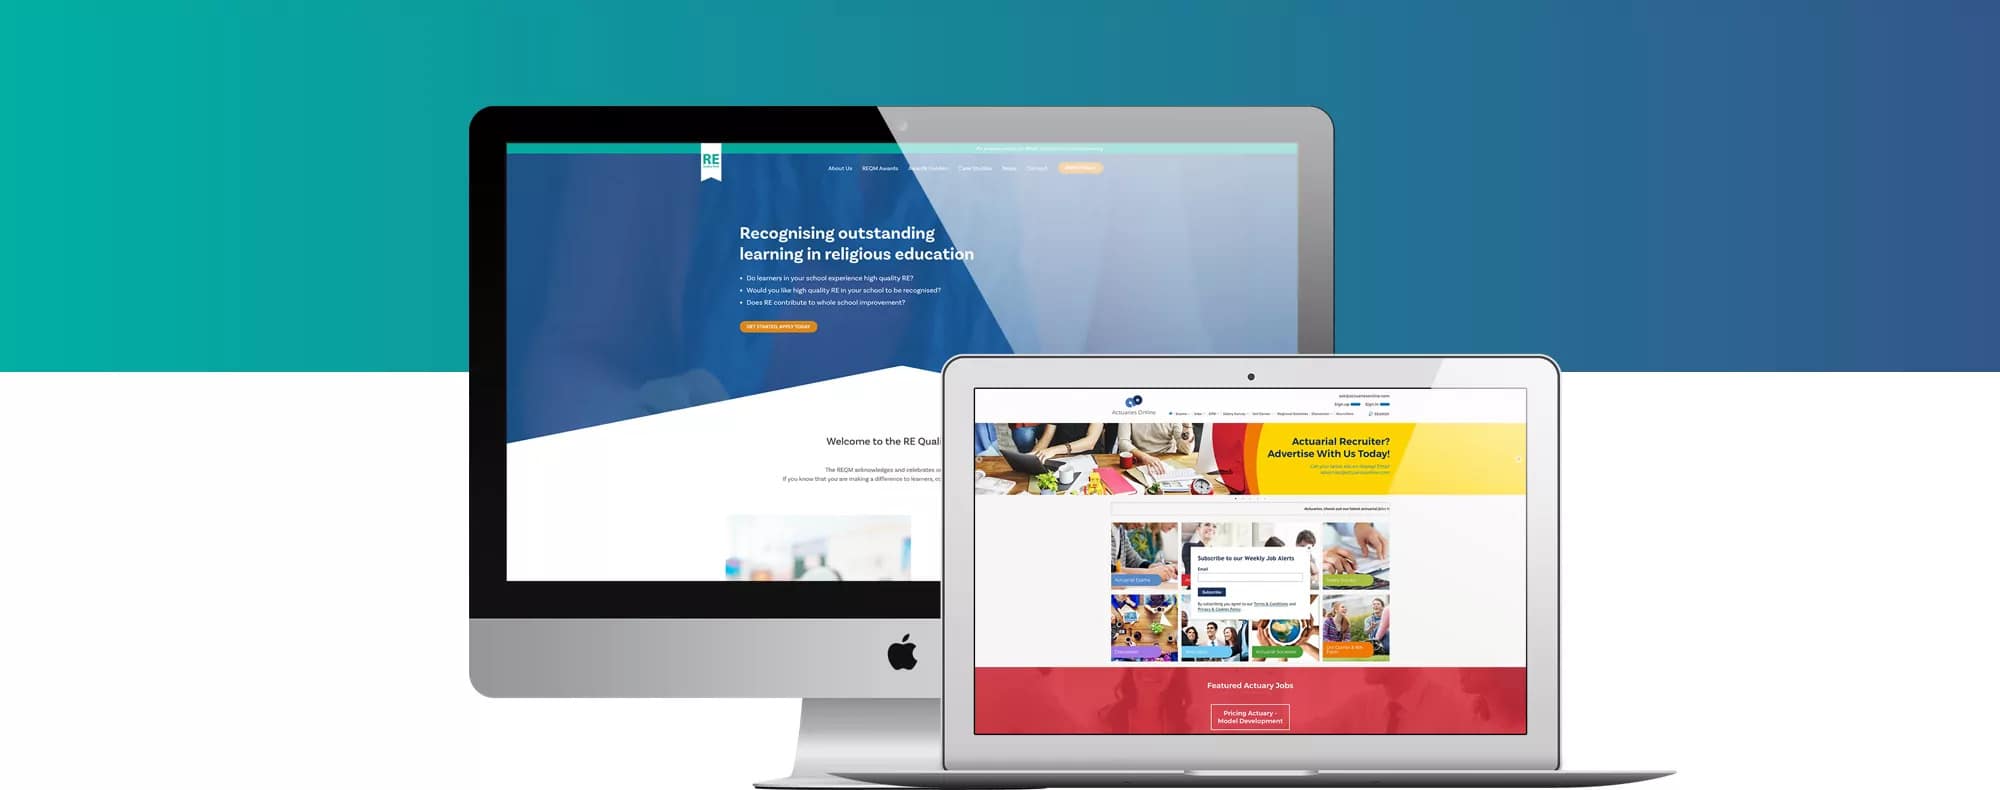 Website design for Accreditation Companies